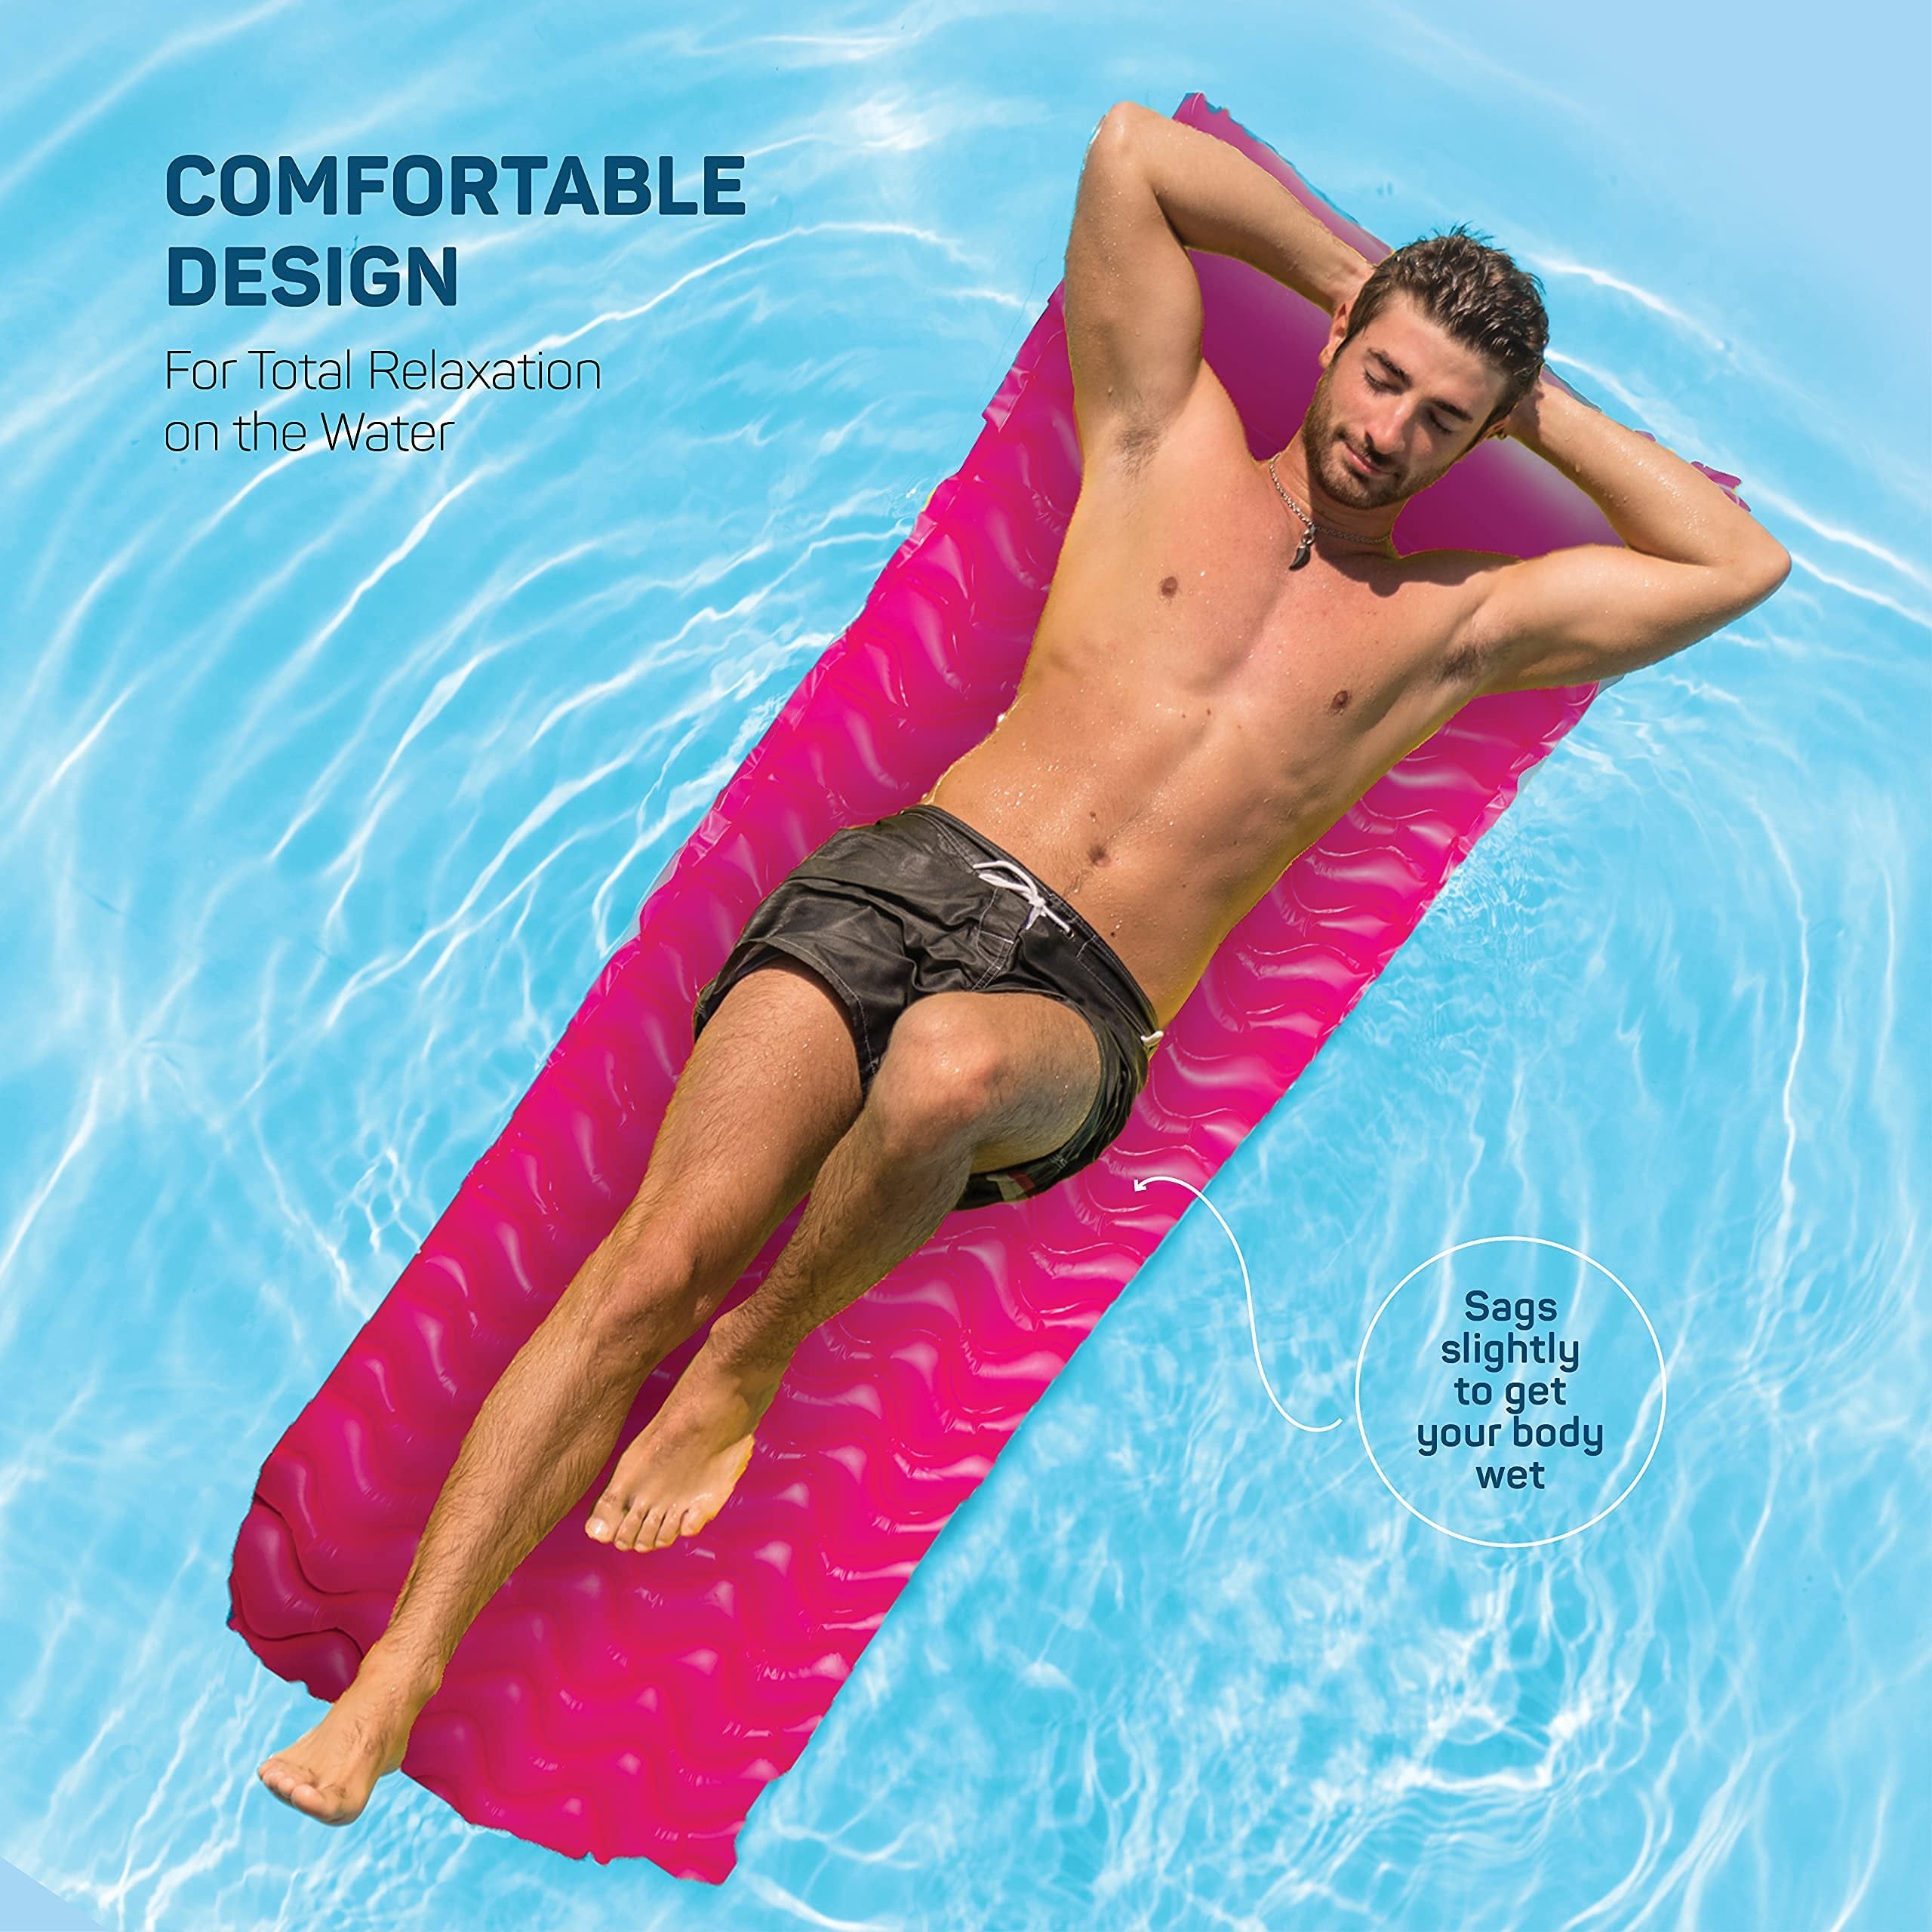 Inflatable Pool Floats Wave Mat Adult Size with Headrest - Set of 2 - Green/Pink - 90 X 34 - Free Shipping